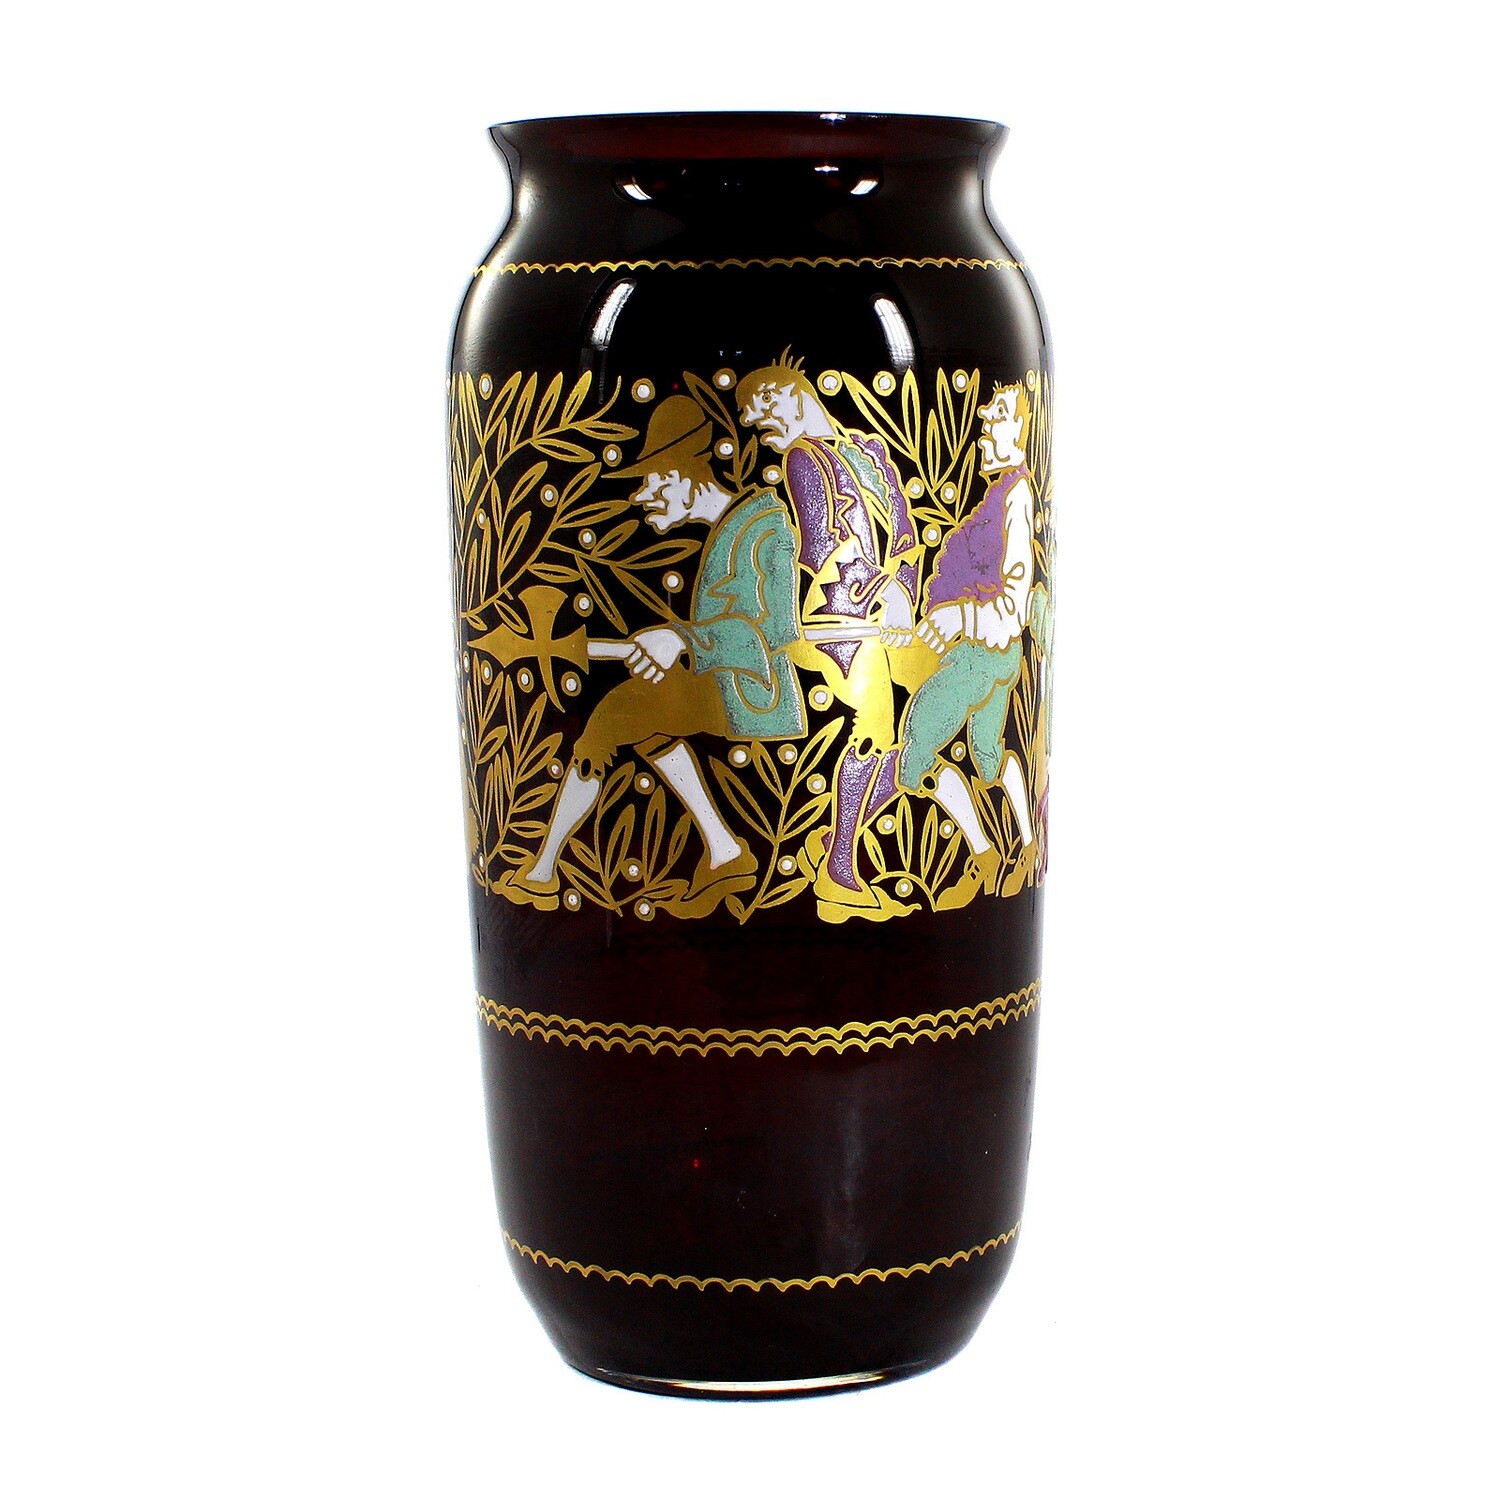 Vase made of purple glass with gold and enamel painting, Zwiesel around 1925